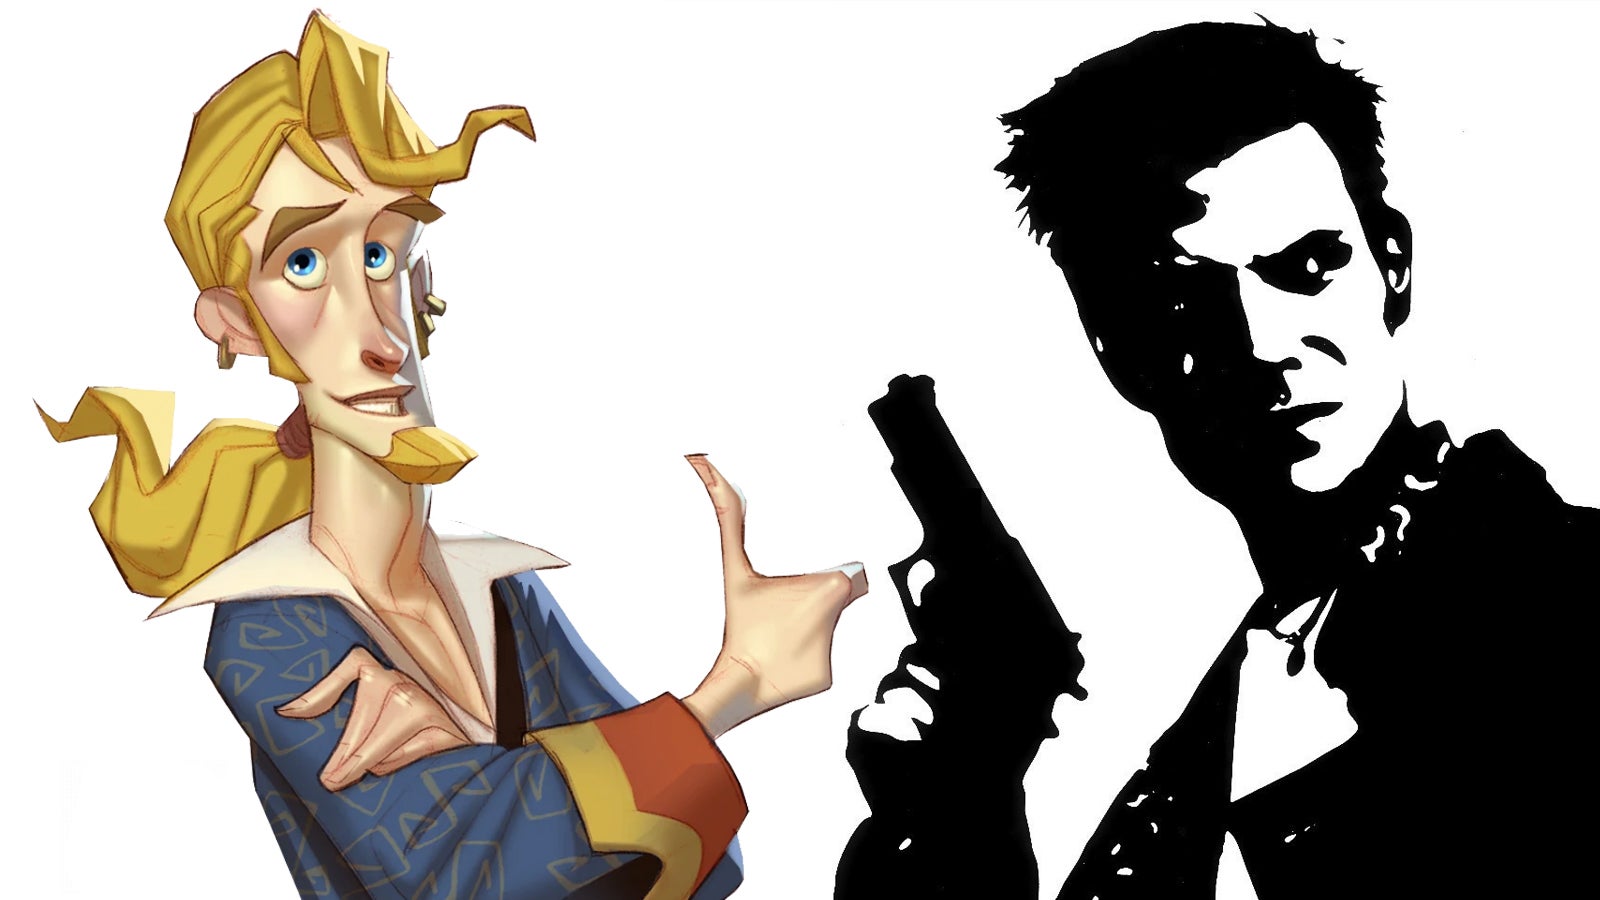 Image for After Monkey Island and Max Payne, what should get revived next?